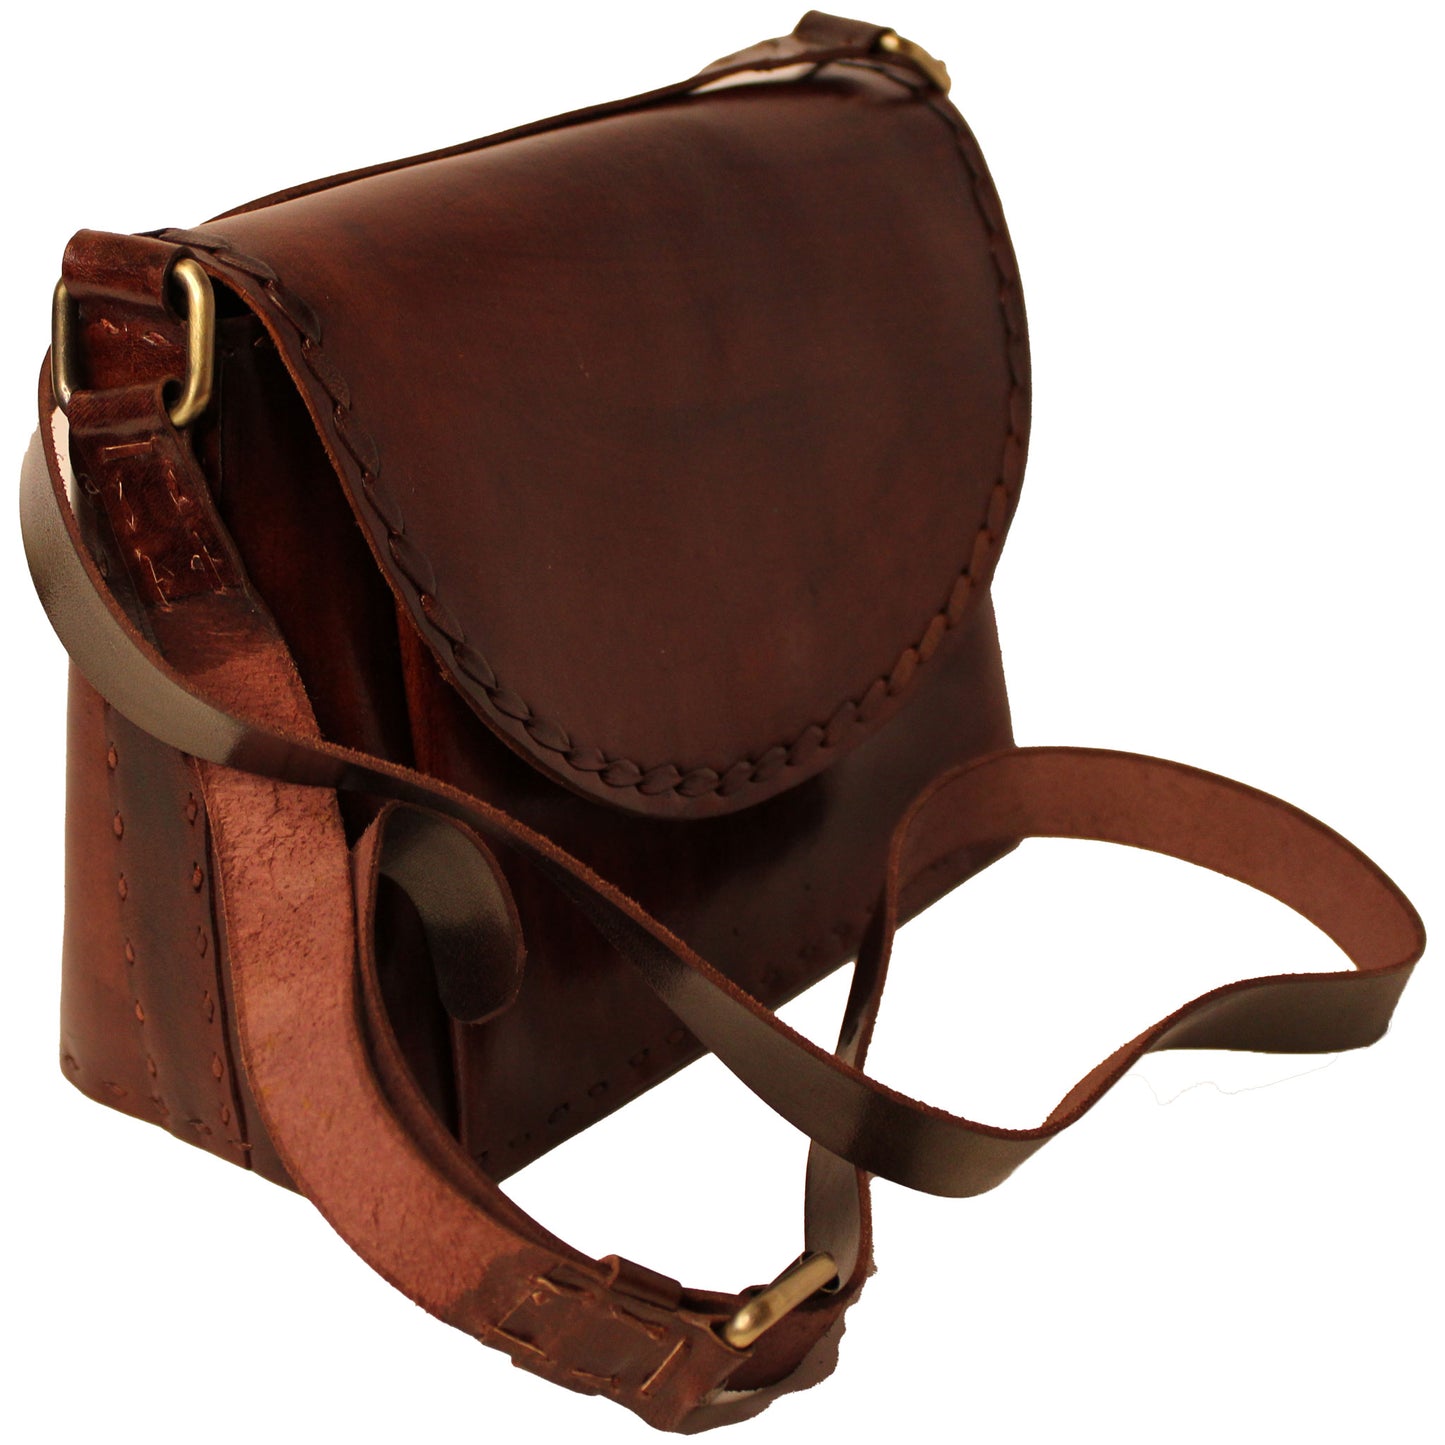 Cherry Brown Classic Box - Leather Sling Bag